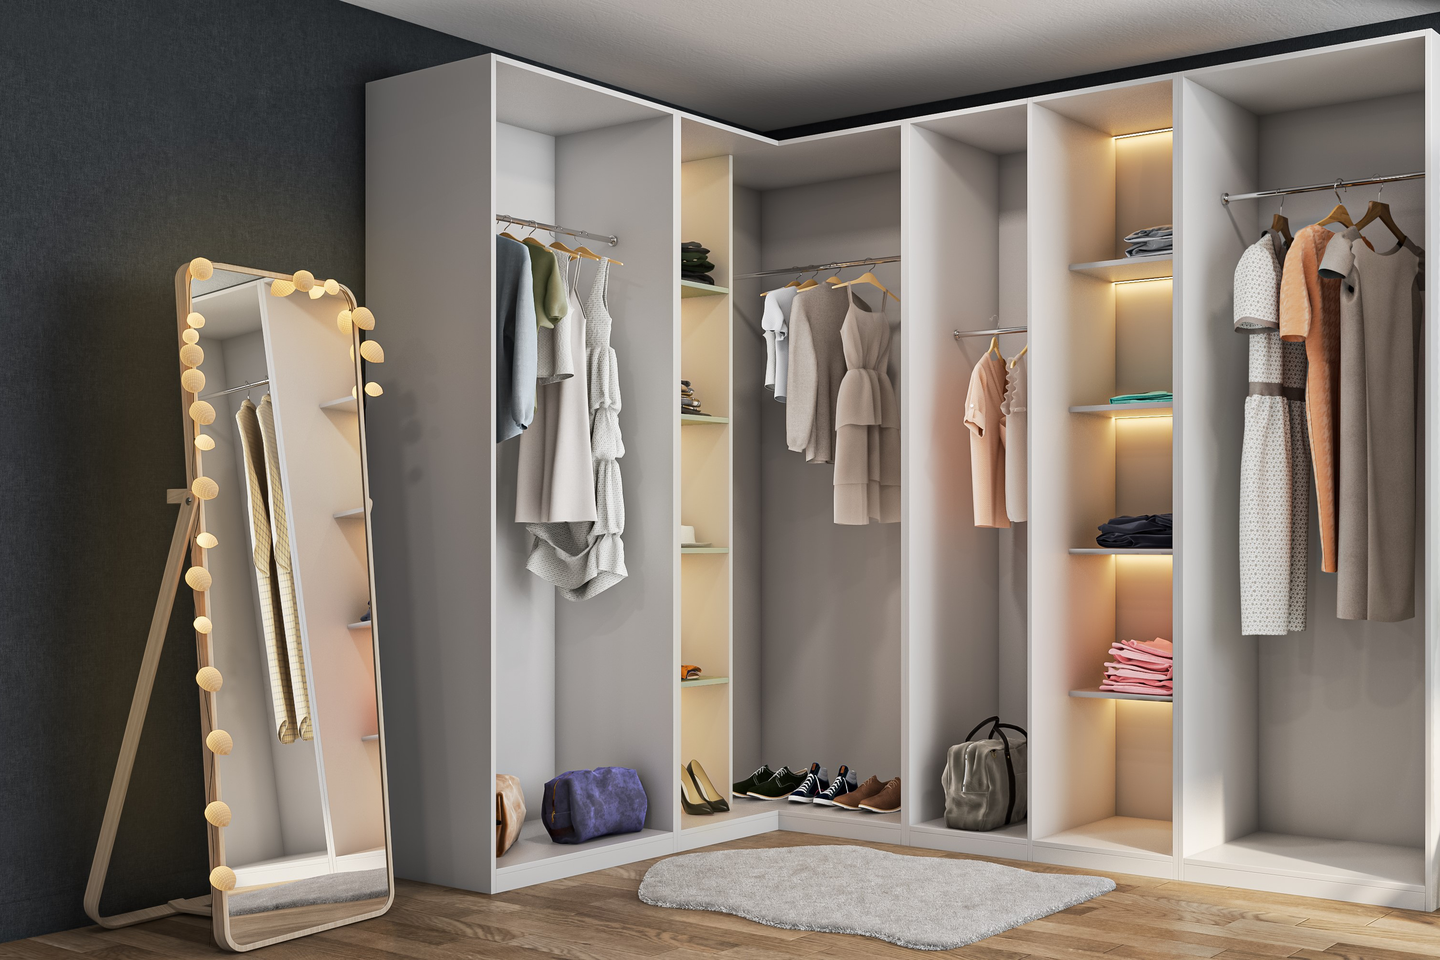 L-Shaped Modern Compact Walk-In Wardrobe Design with Shelves - Livspace